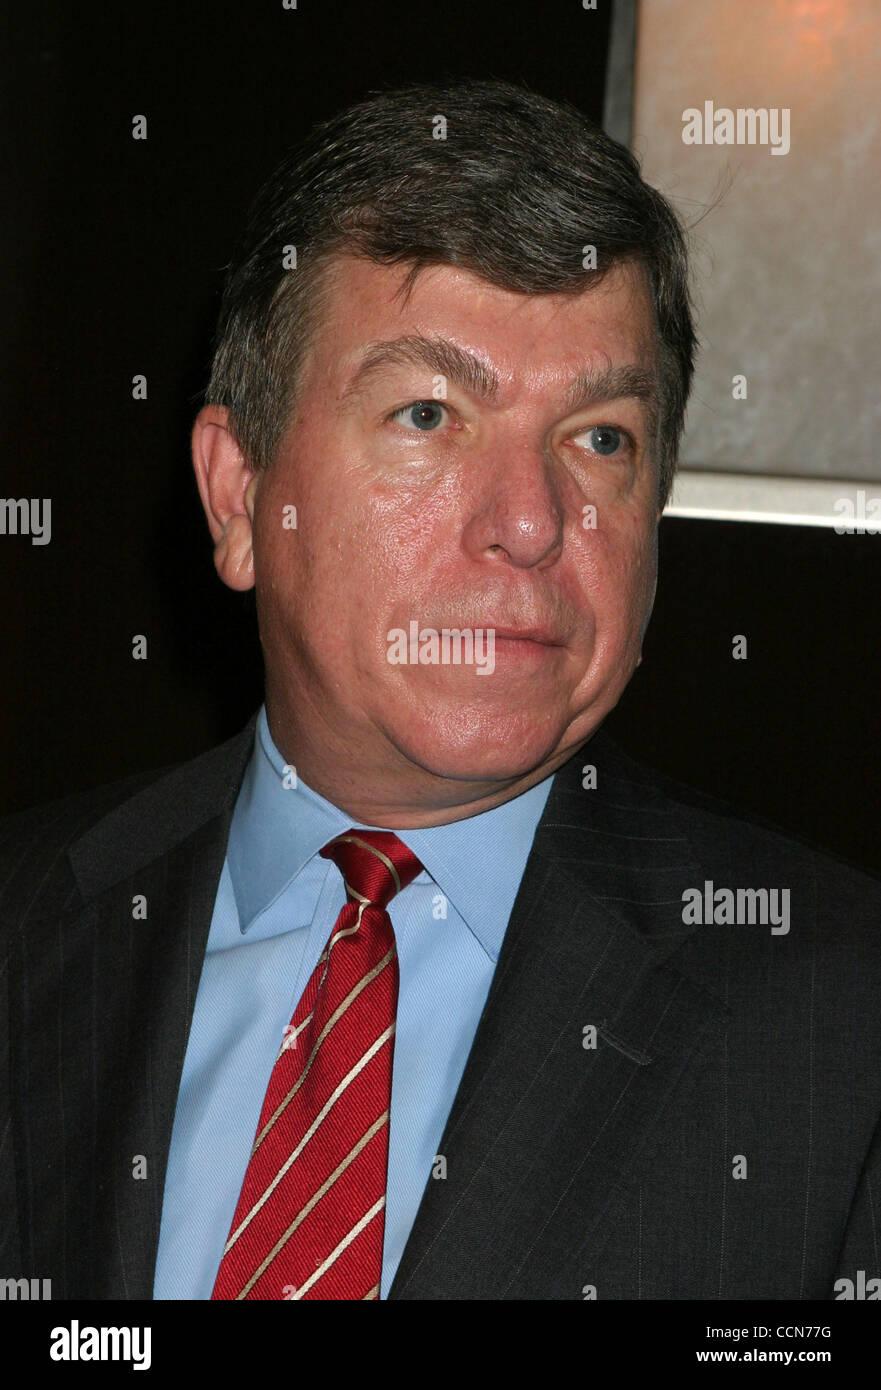 Aug 30, 2004; New York, NY, USA; House Majority Whip ROY BLUNT at the Republican breakfast for the Ohio Delegation held during the GOP Convention. Stock Photo